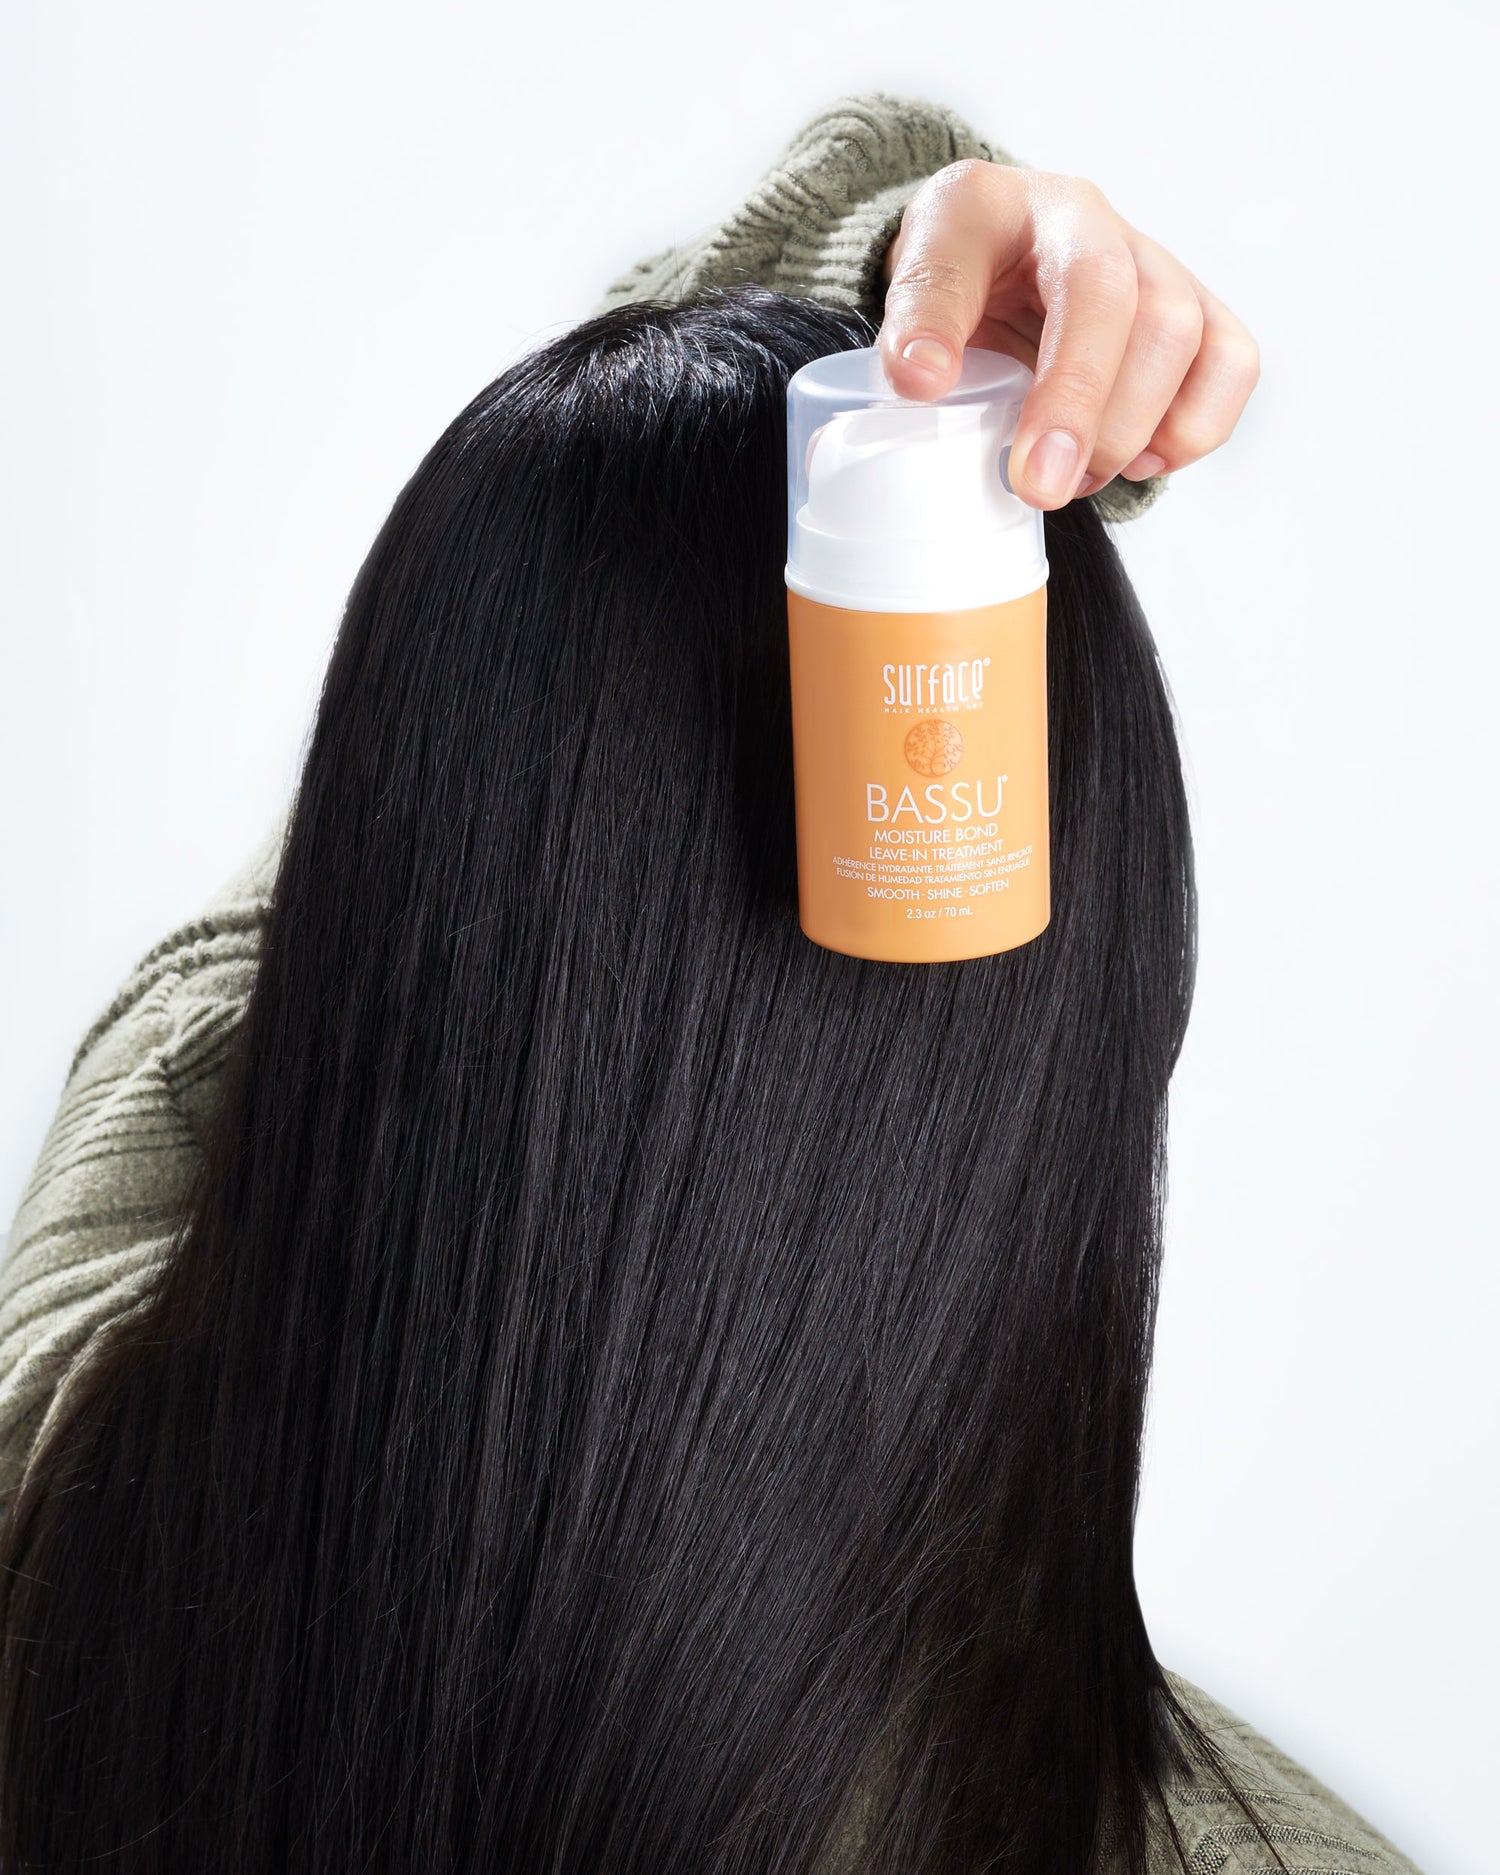 Best overnight hair mask 2021 to fix your tresses | The Independent